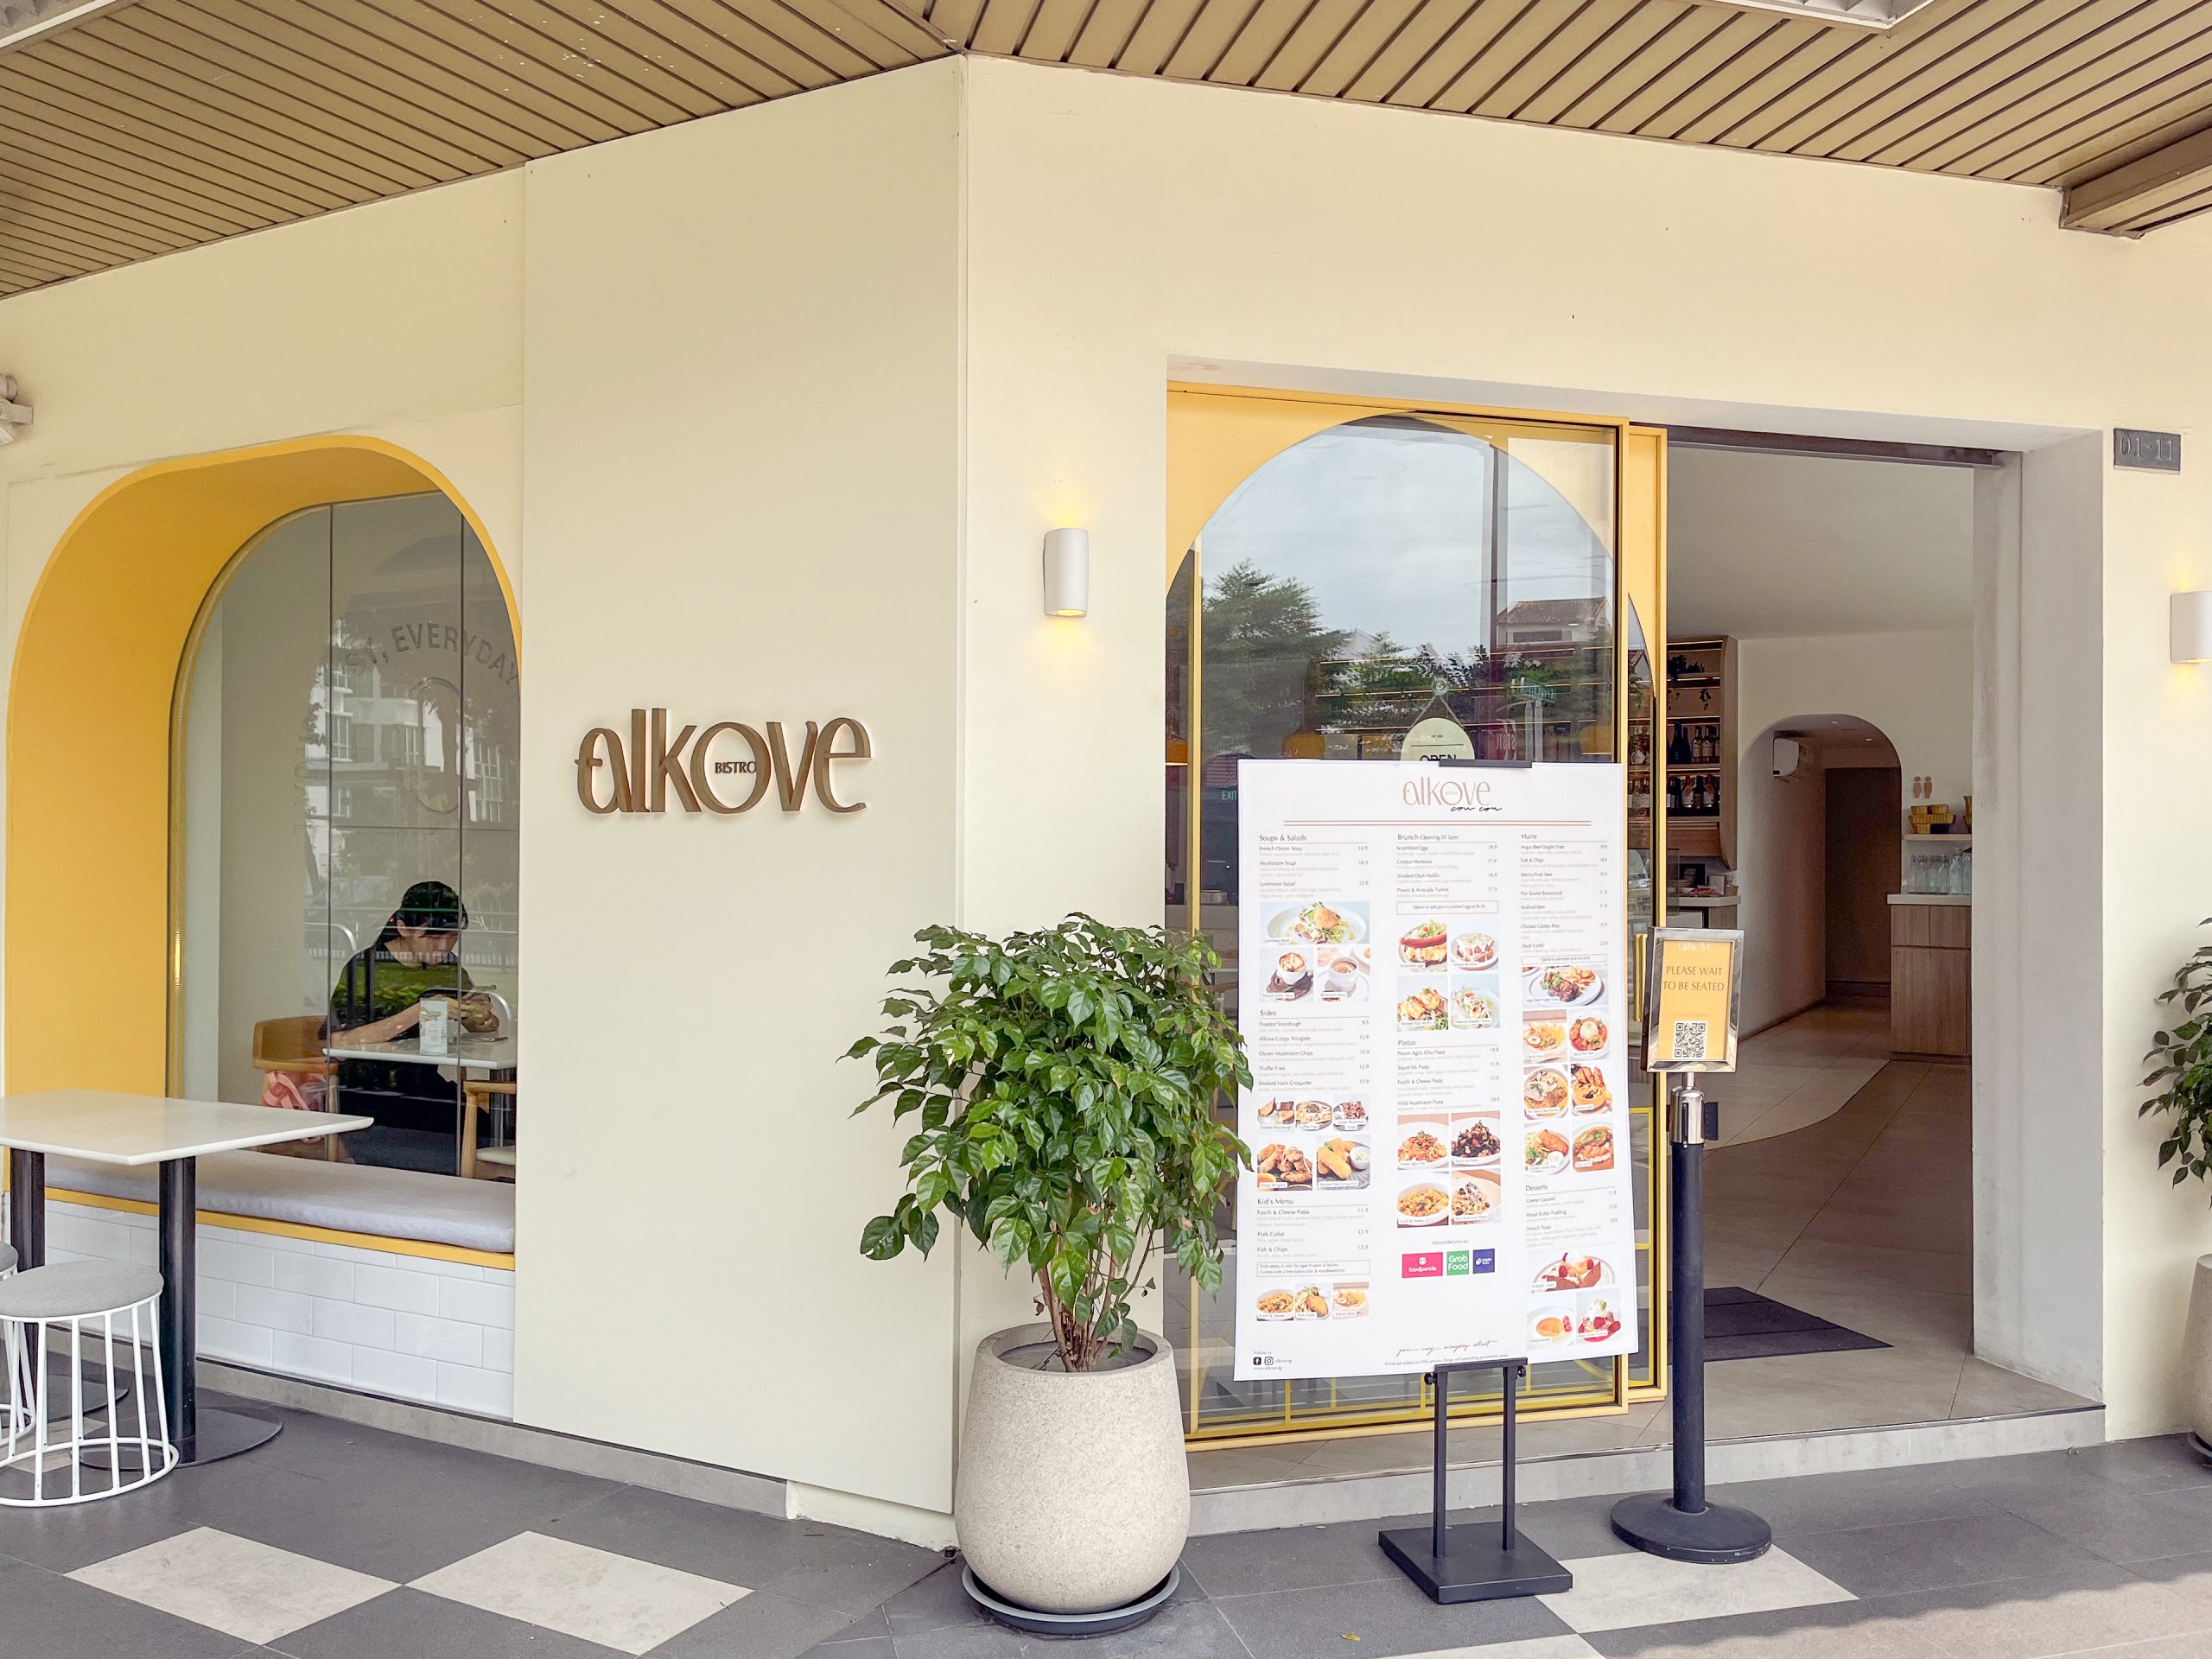 Image of Alkove's Exterior